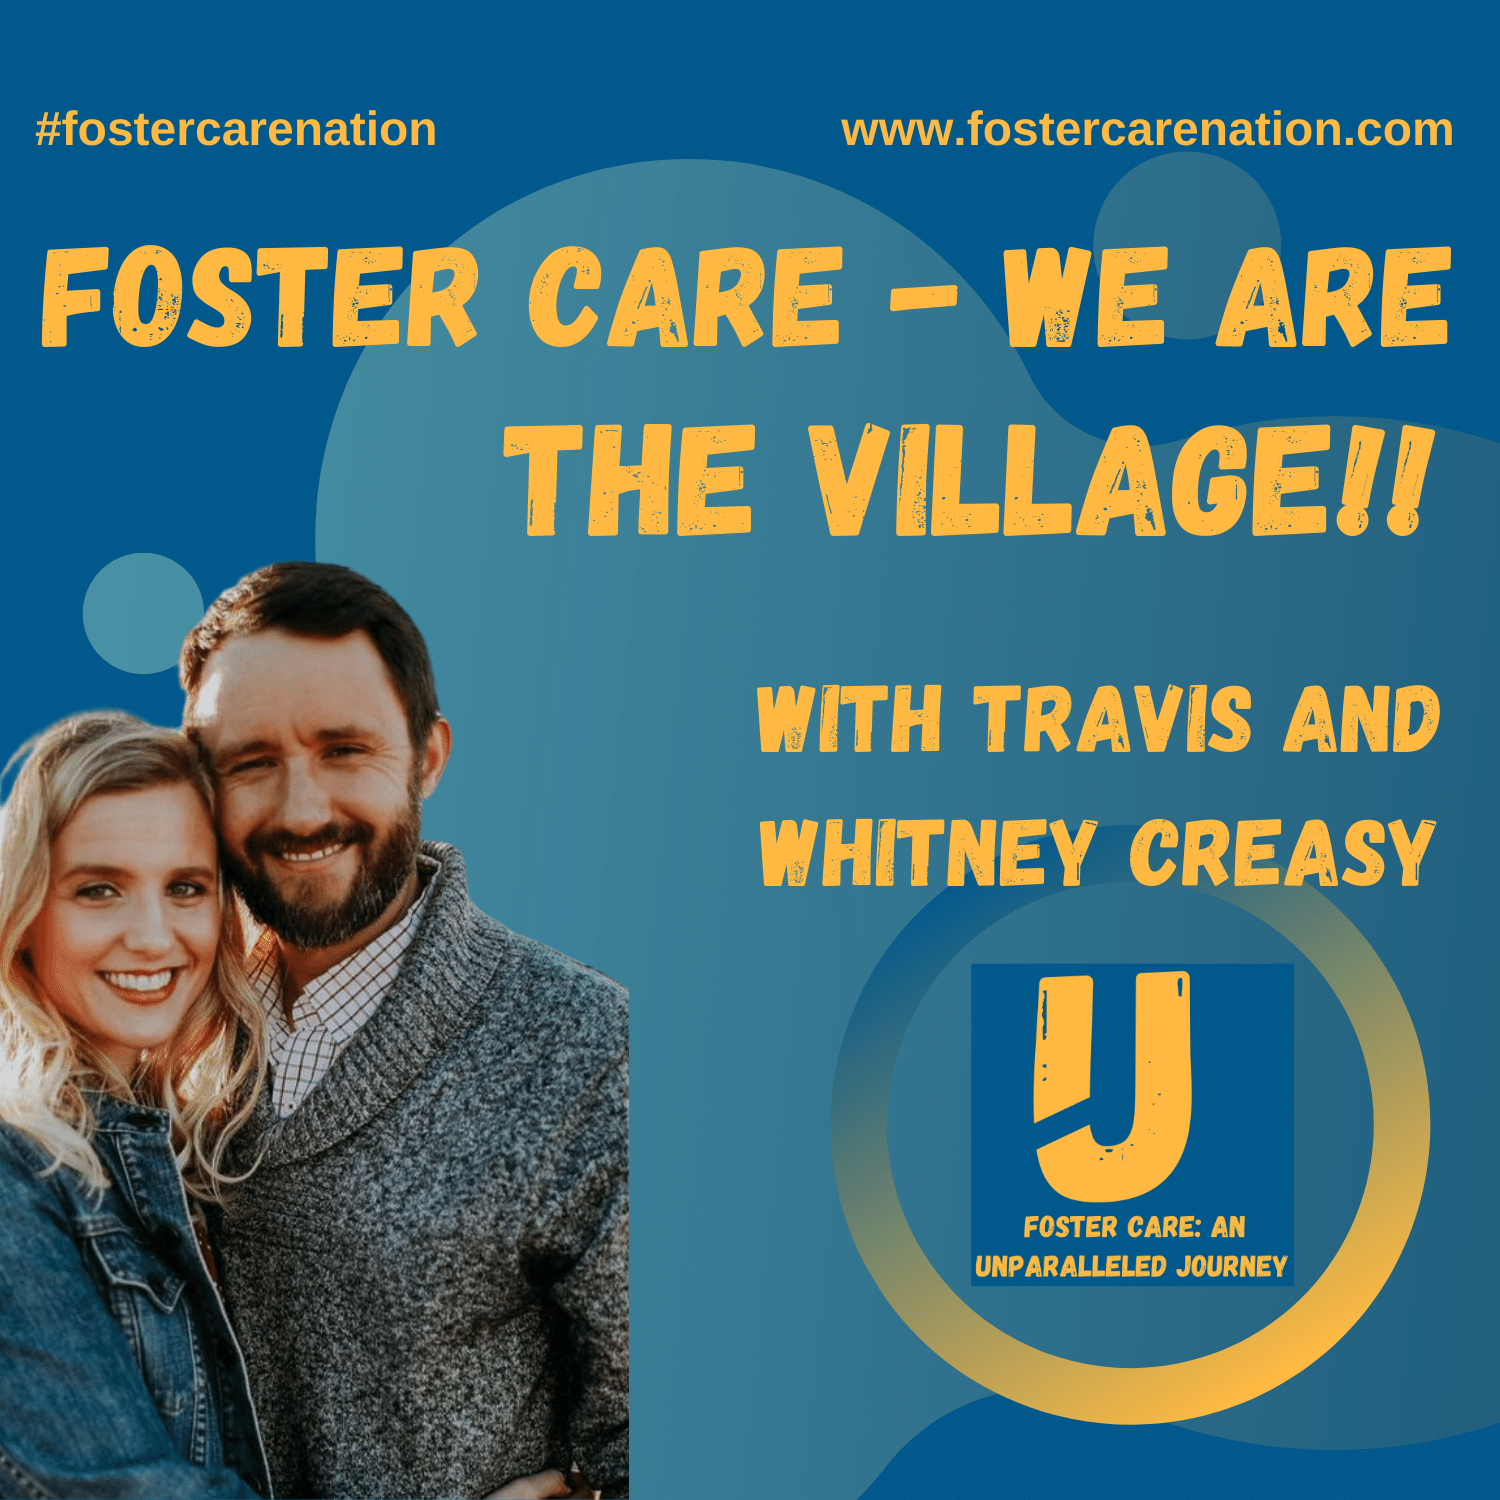 Foster Care - we are the village